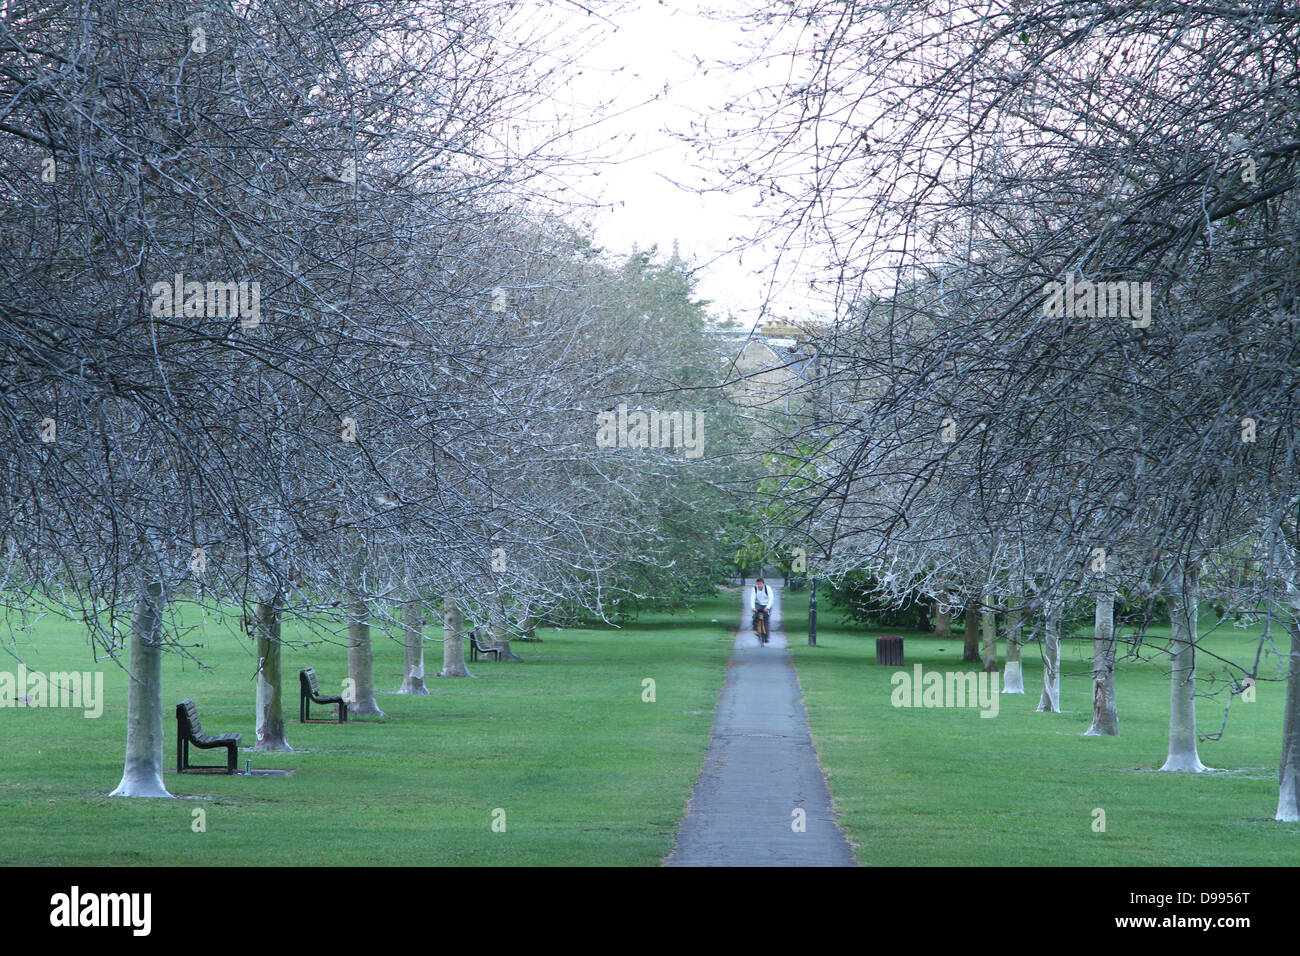 Cambridge, UK. 14th June 2013. This avenue of trees on Jesus Green in Cambridge, Cambridgeshire, is covered with the cobweb-like nests of bird cherry ermine moth caterpillars. The larvae make communal nests/webs for protection, before feasting on the leaves of the tree. Pic: Paul Marriott Photography/Alamy Live News Stock Photo